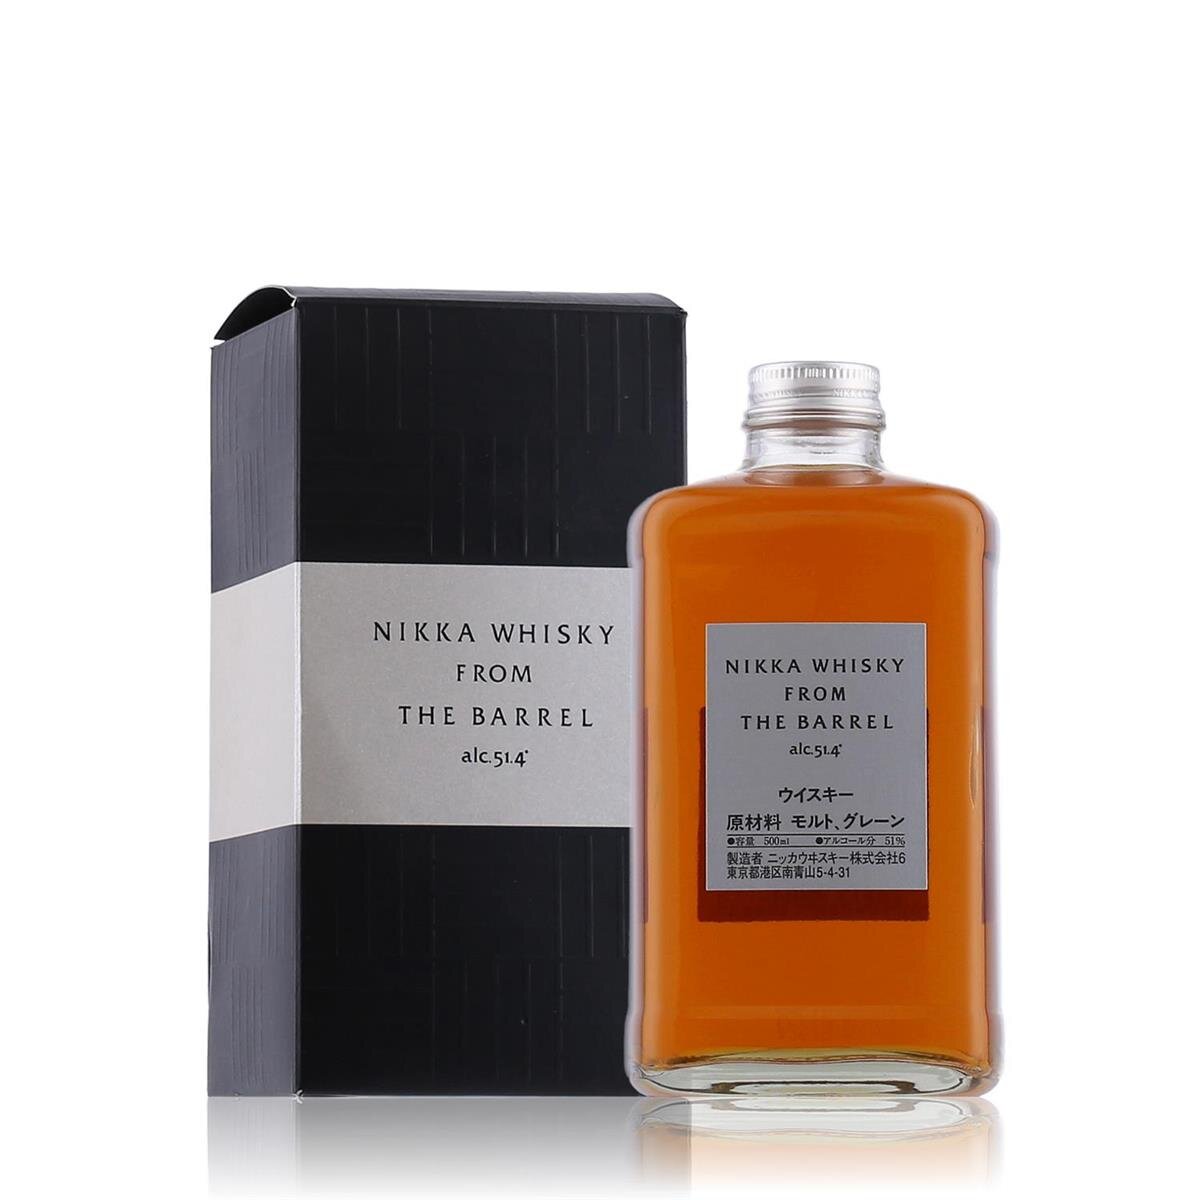 0,5l Double The Whisky Nikka Barrel From Matured 38,9 Geschenkbox, in